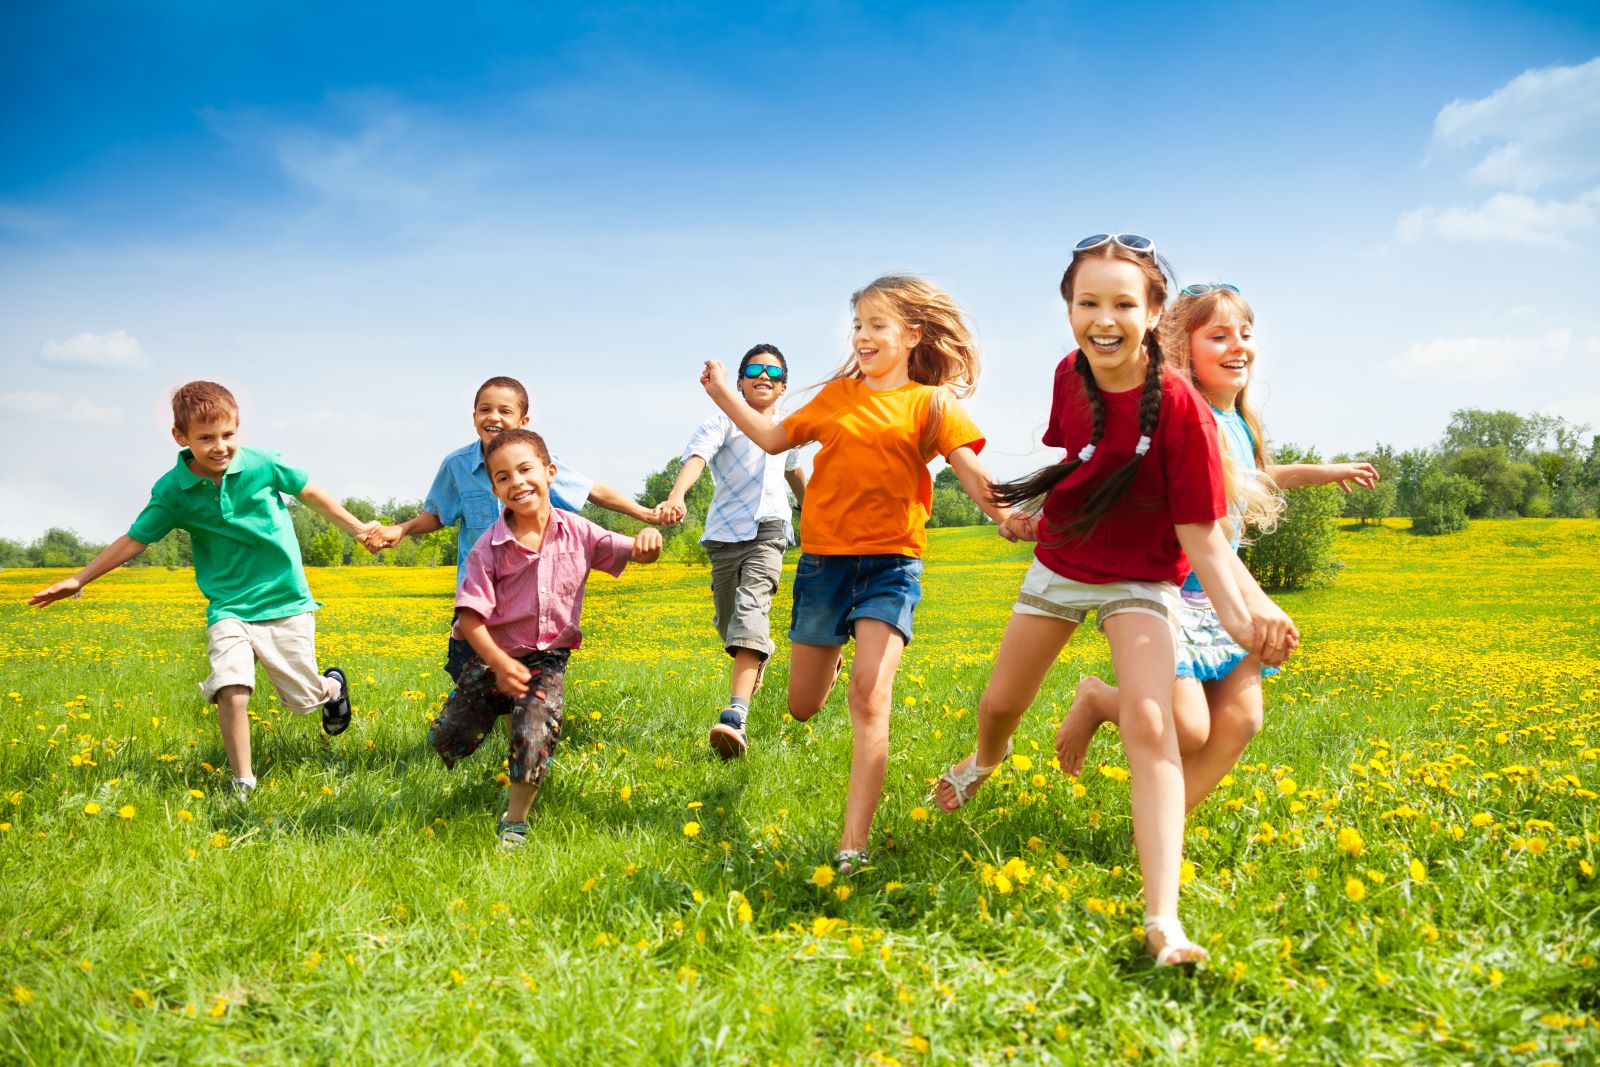 A group of children running through a vibrant, green field with blue skies in the background.